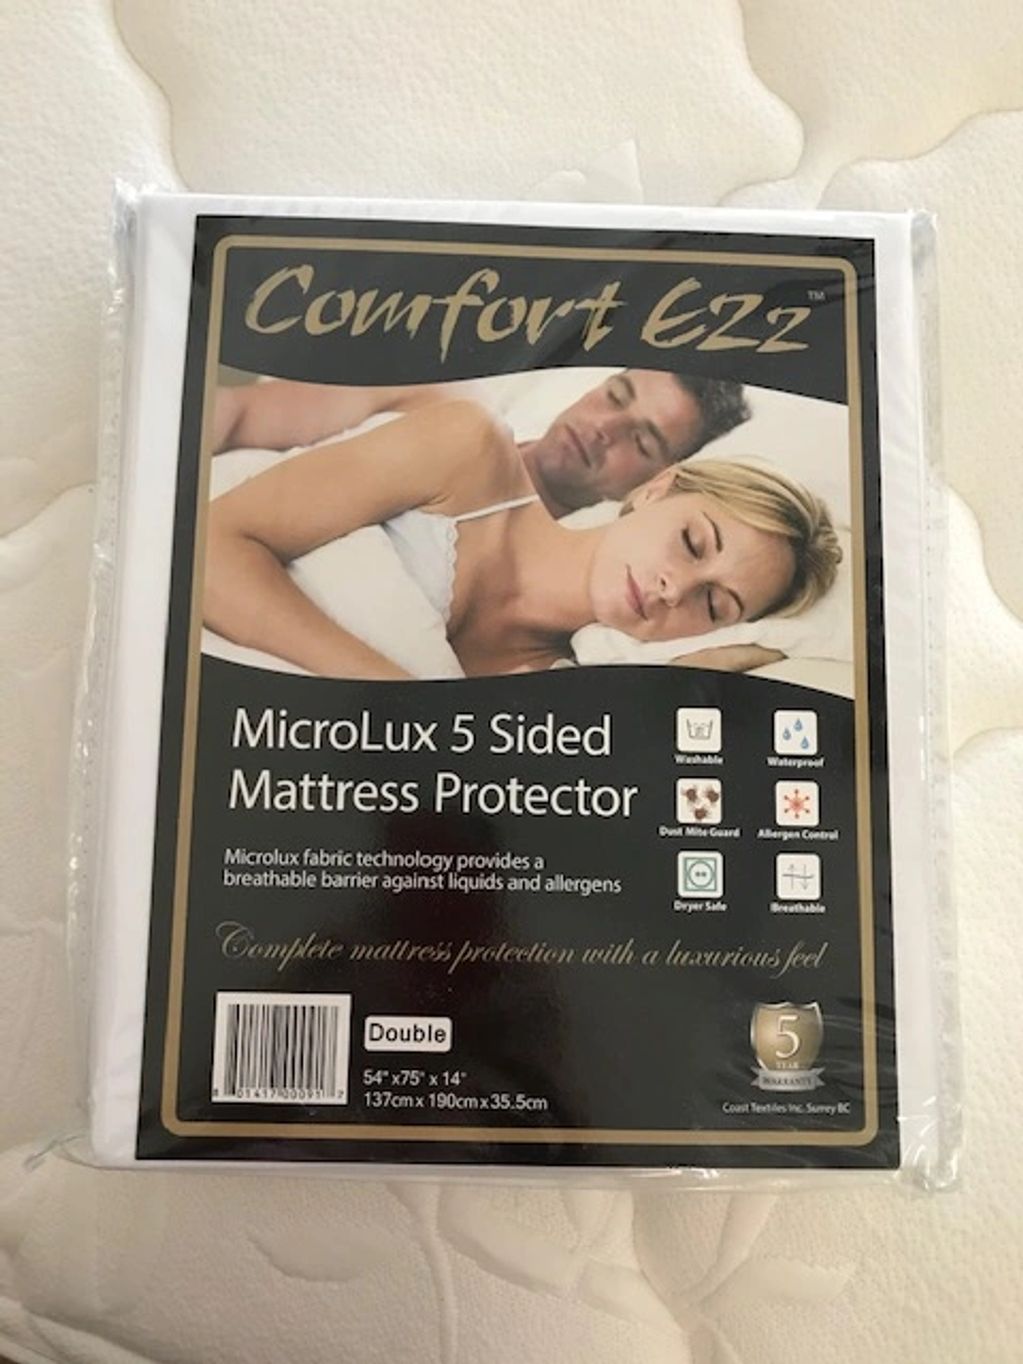 Comfort Ezz, MicroLux 5 Sided Mattress Protector